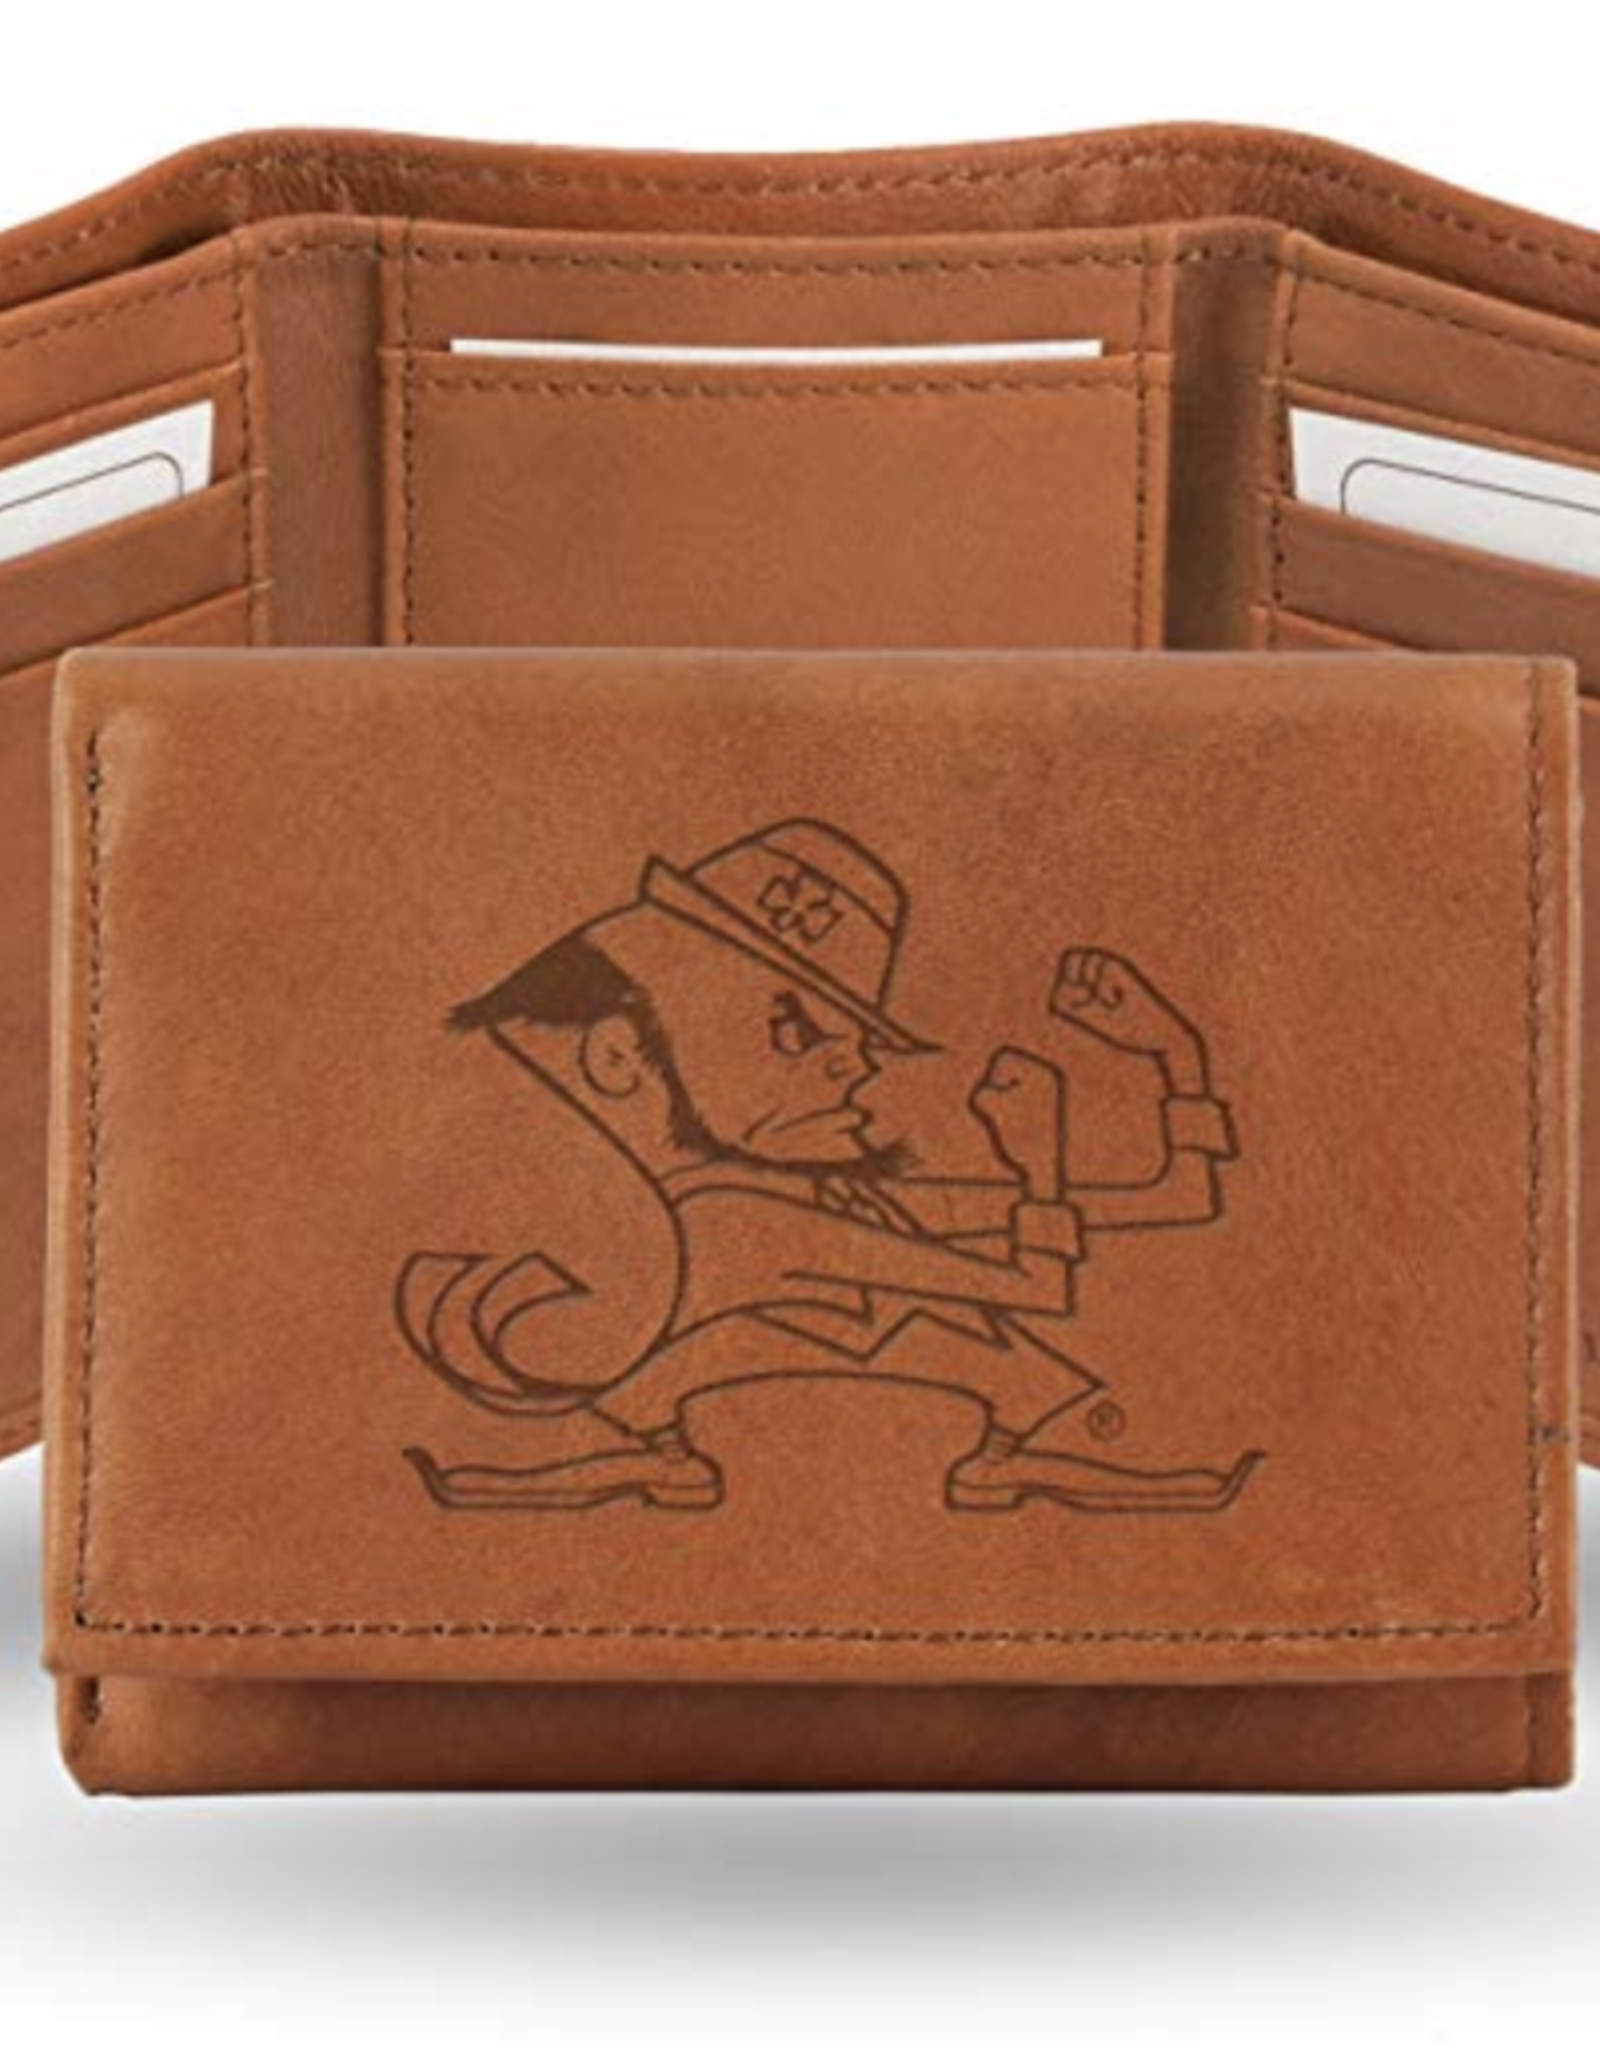 RICO INDUSTRIES Notre Dame Fighting Irish Vintage Leather Trifold Wallet